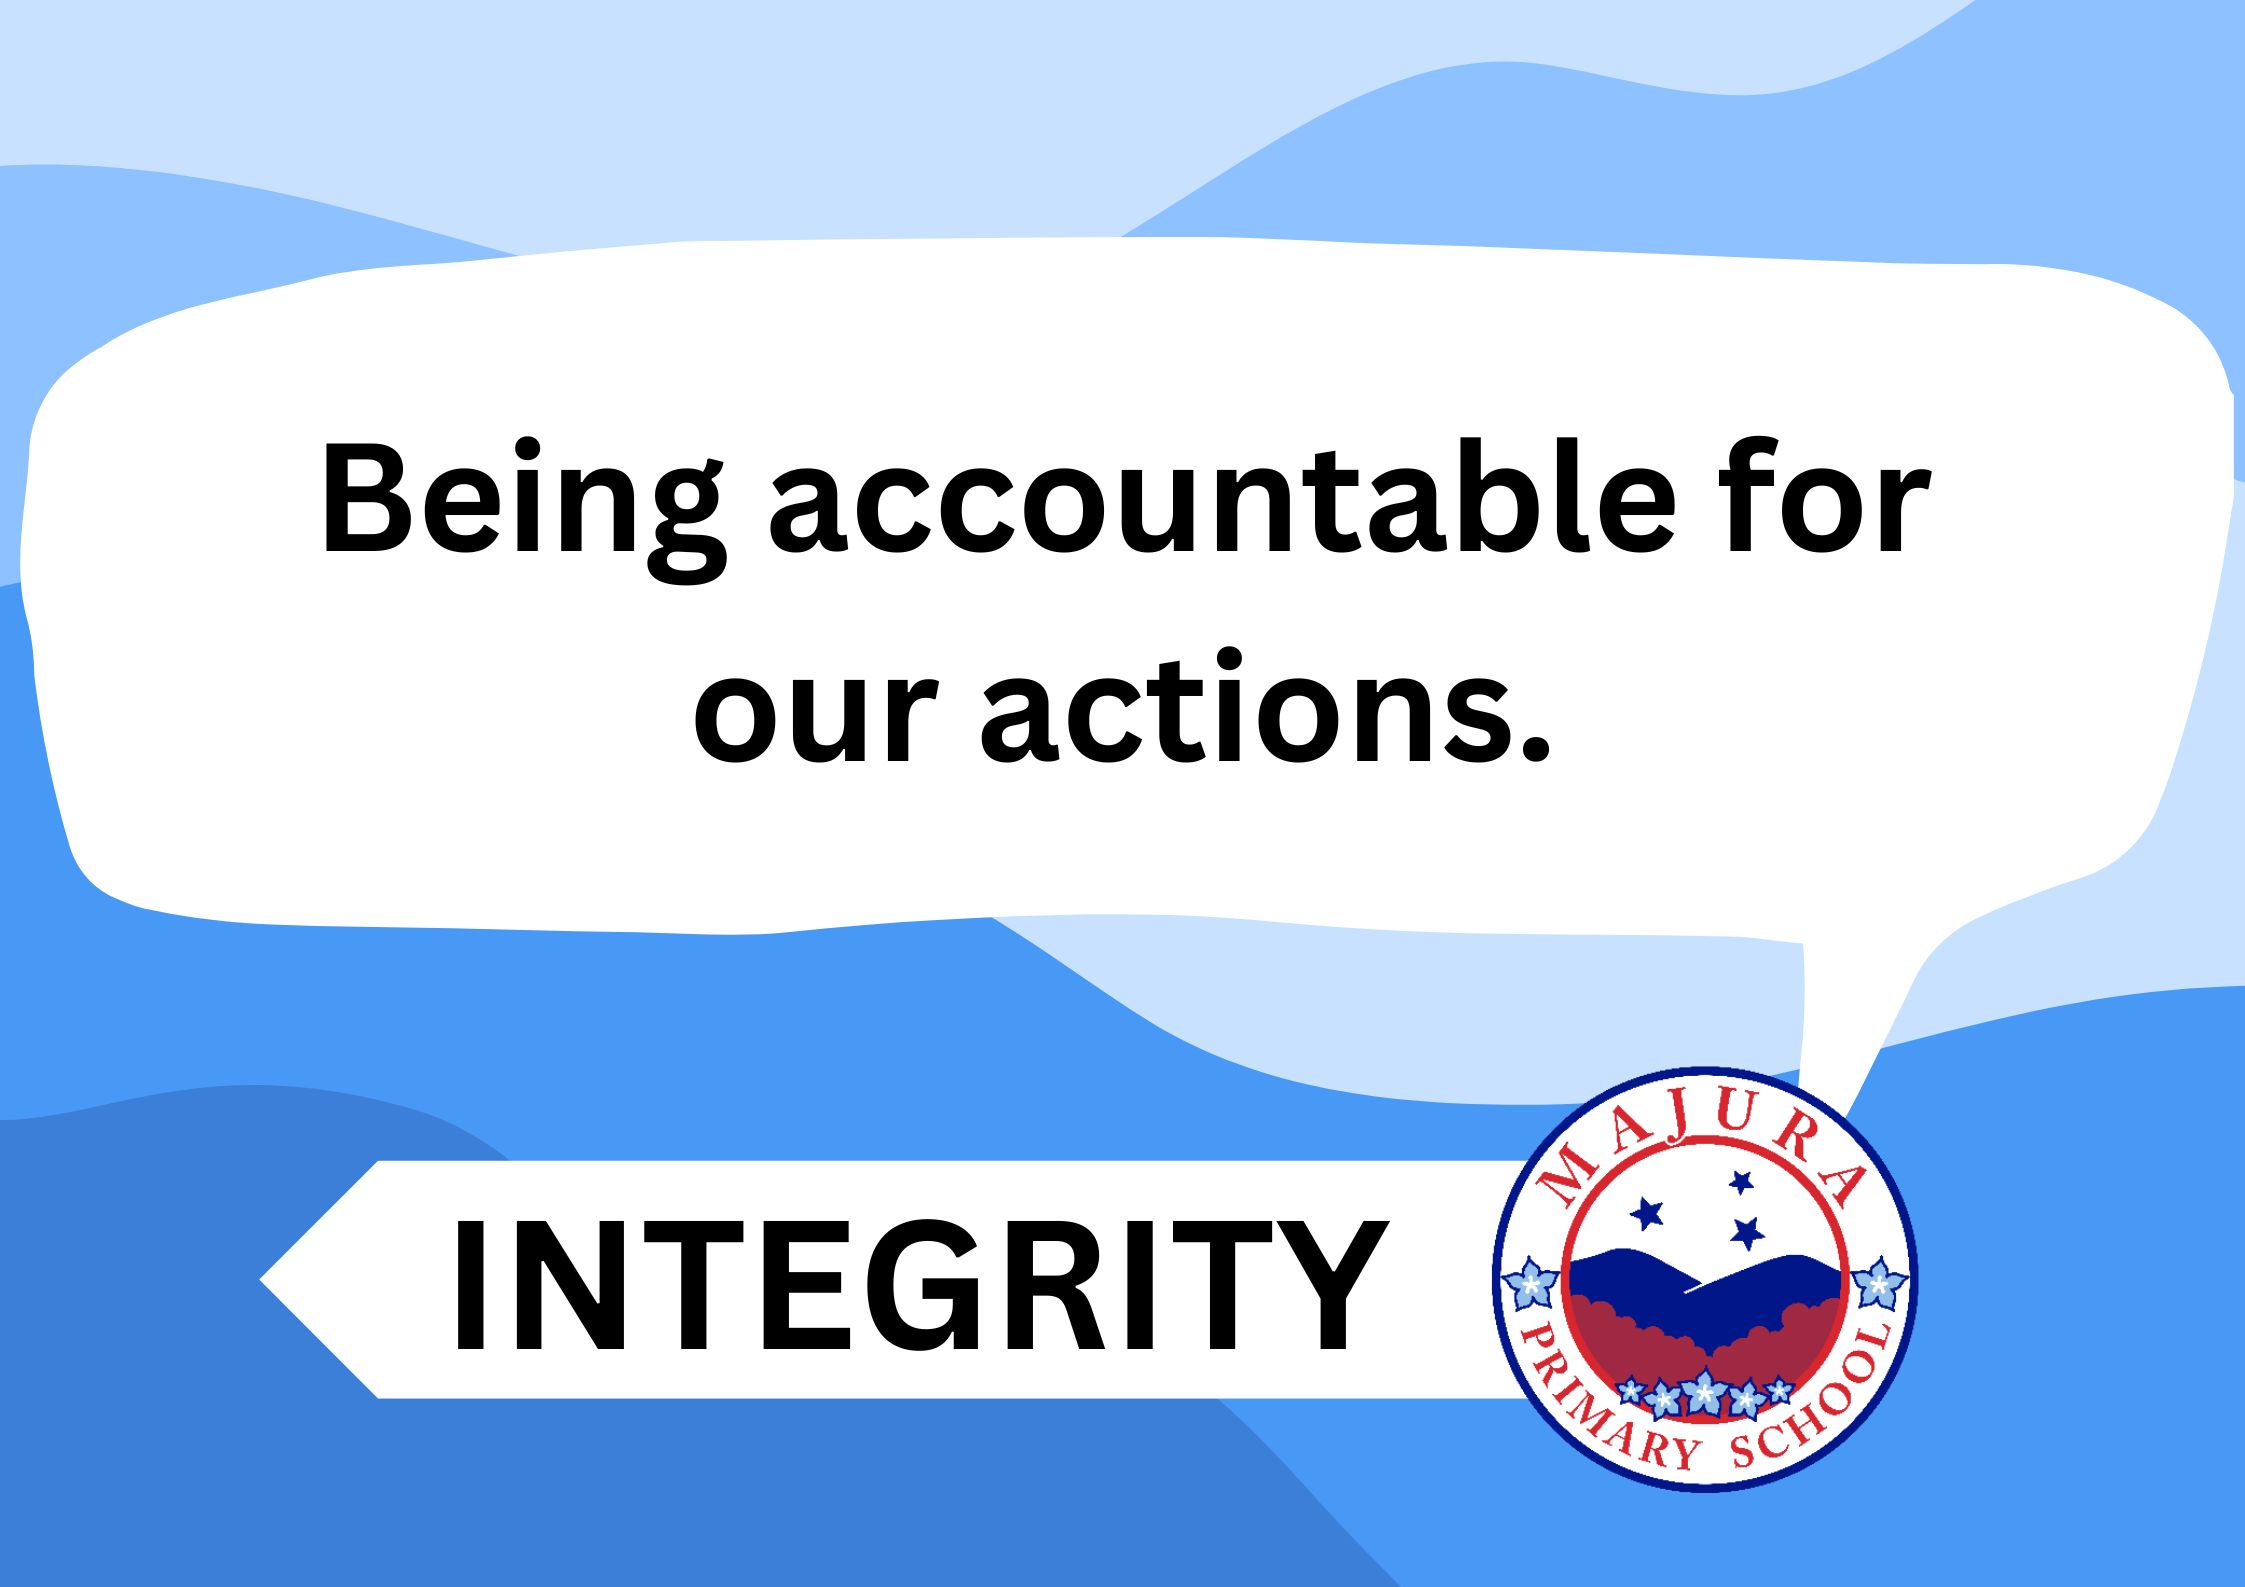 Next to the Majura Primary logo is the word 'Integrity'. Above this is a speech bubble that reads 'Being accountable for our actions'.